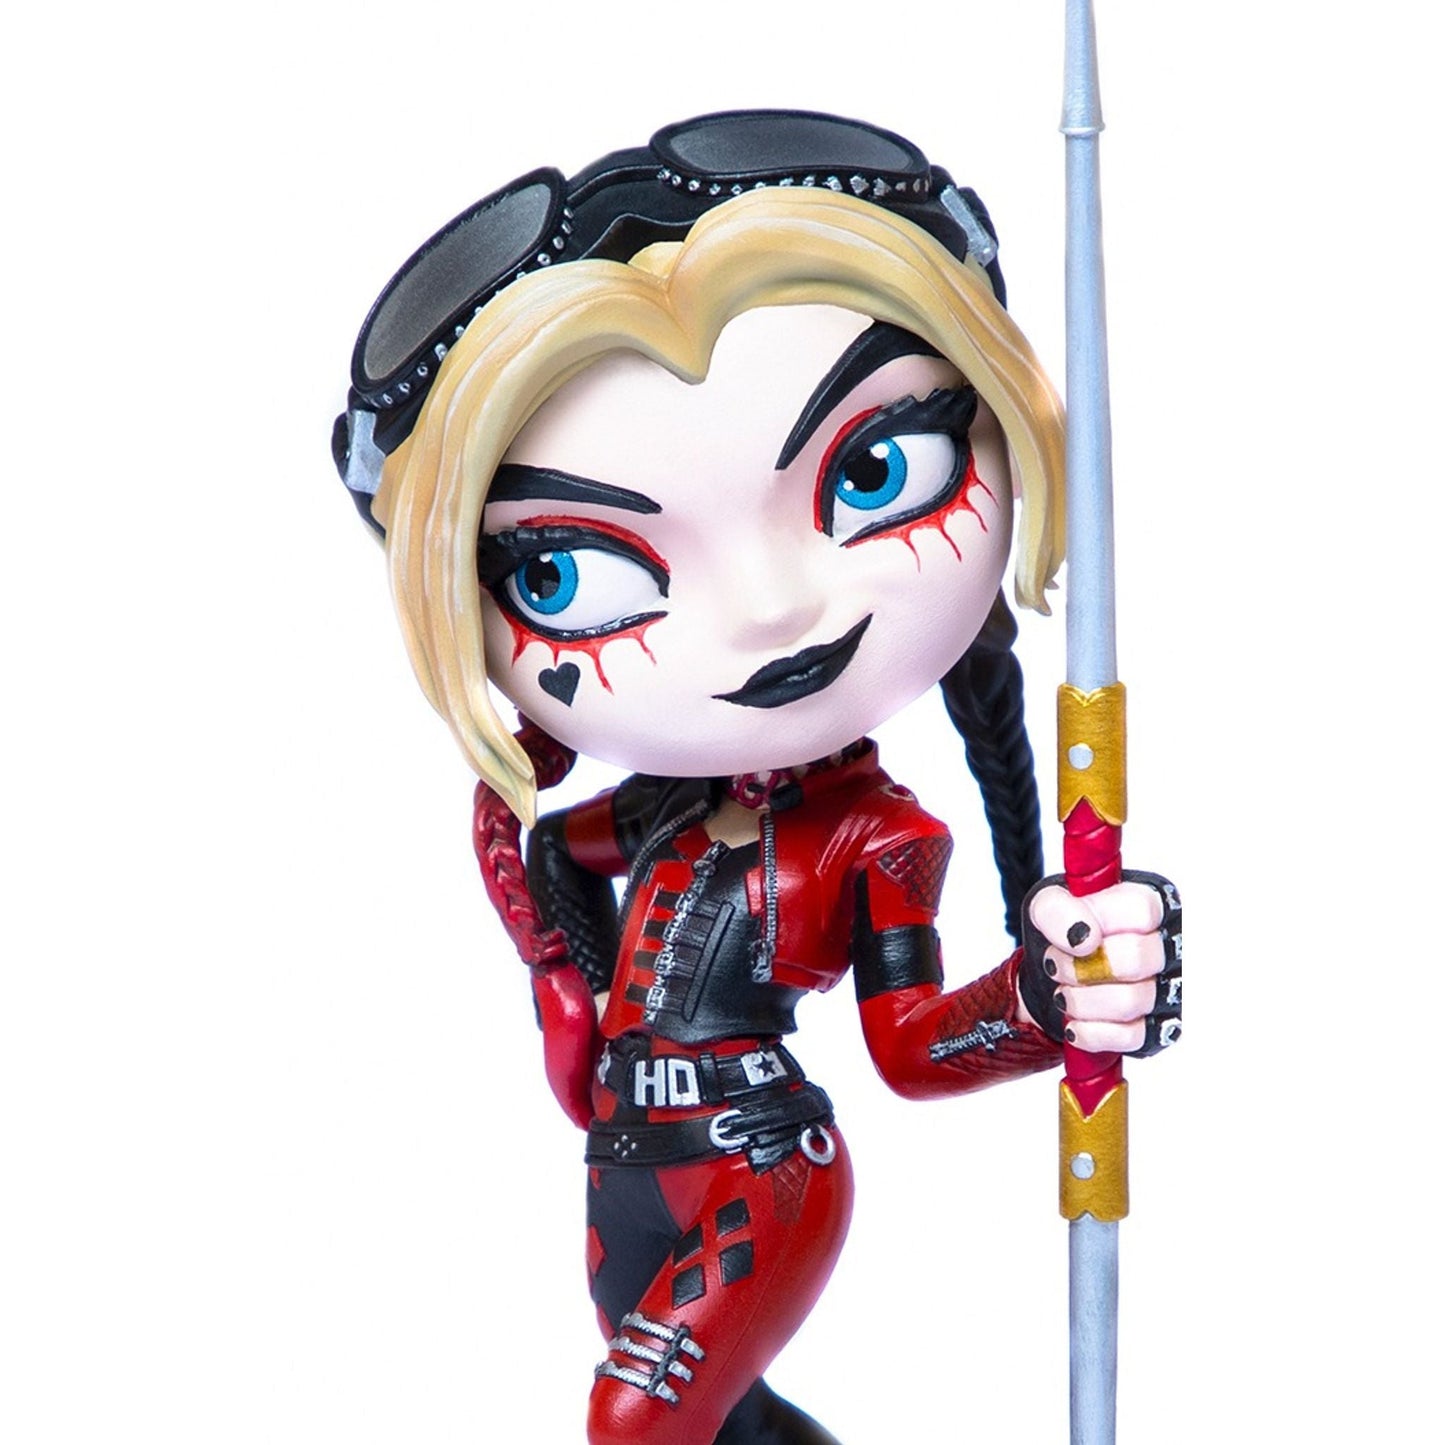 Harley Quinn - The Suicide Squad 2 MiniCo Collectible Figure